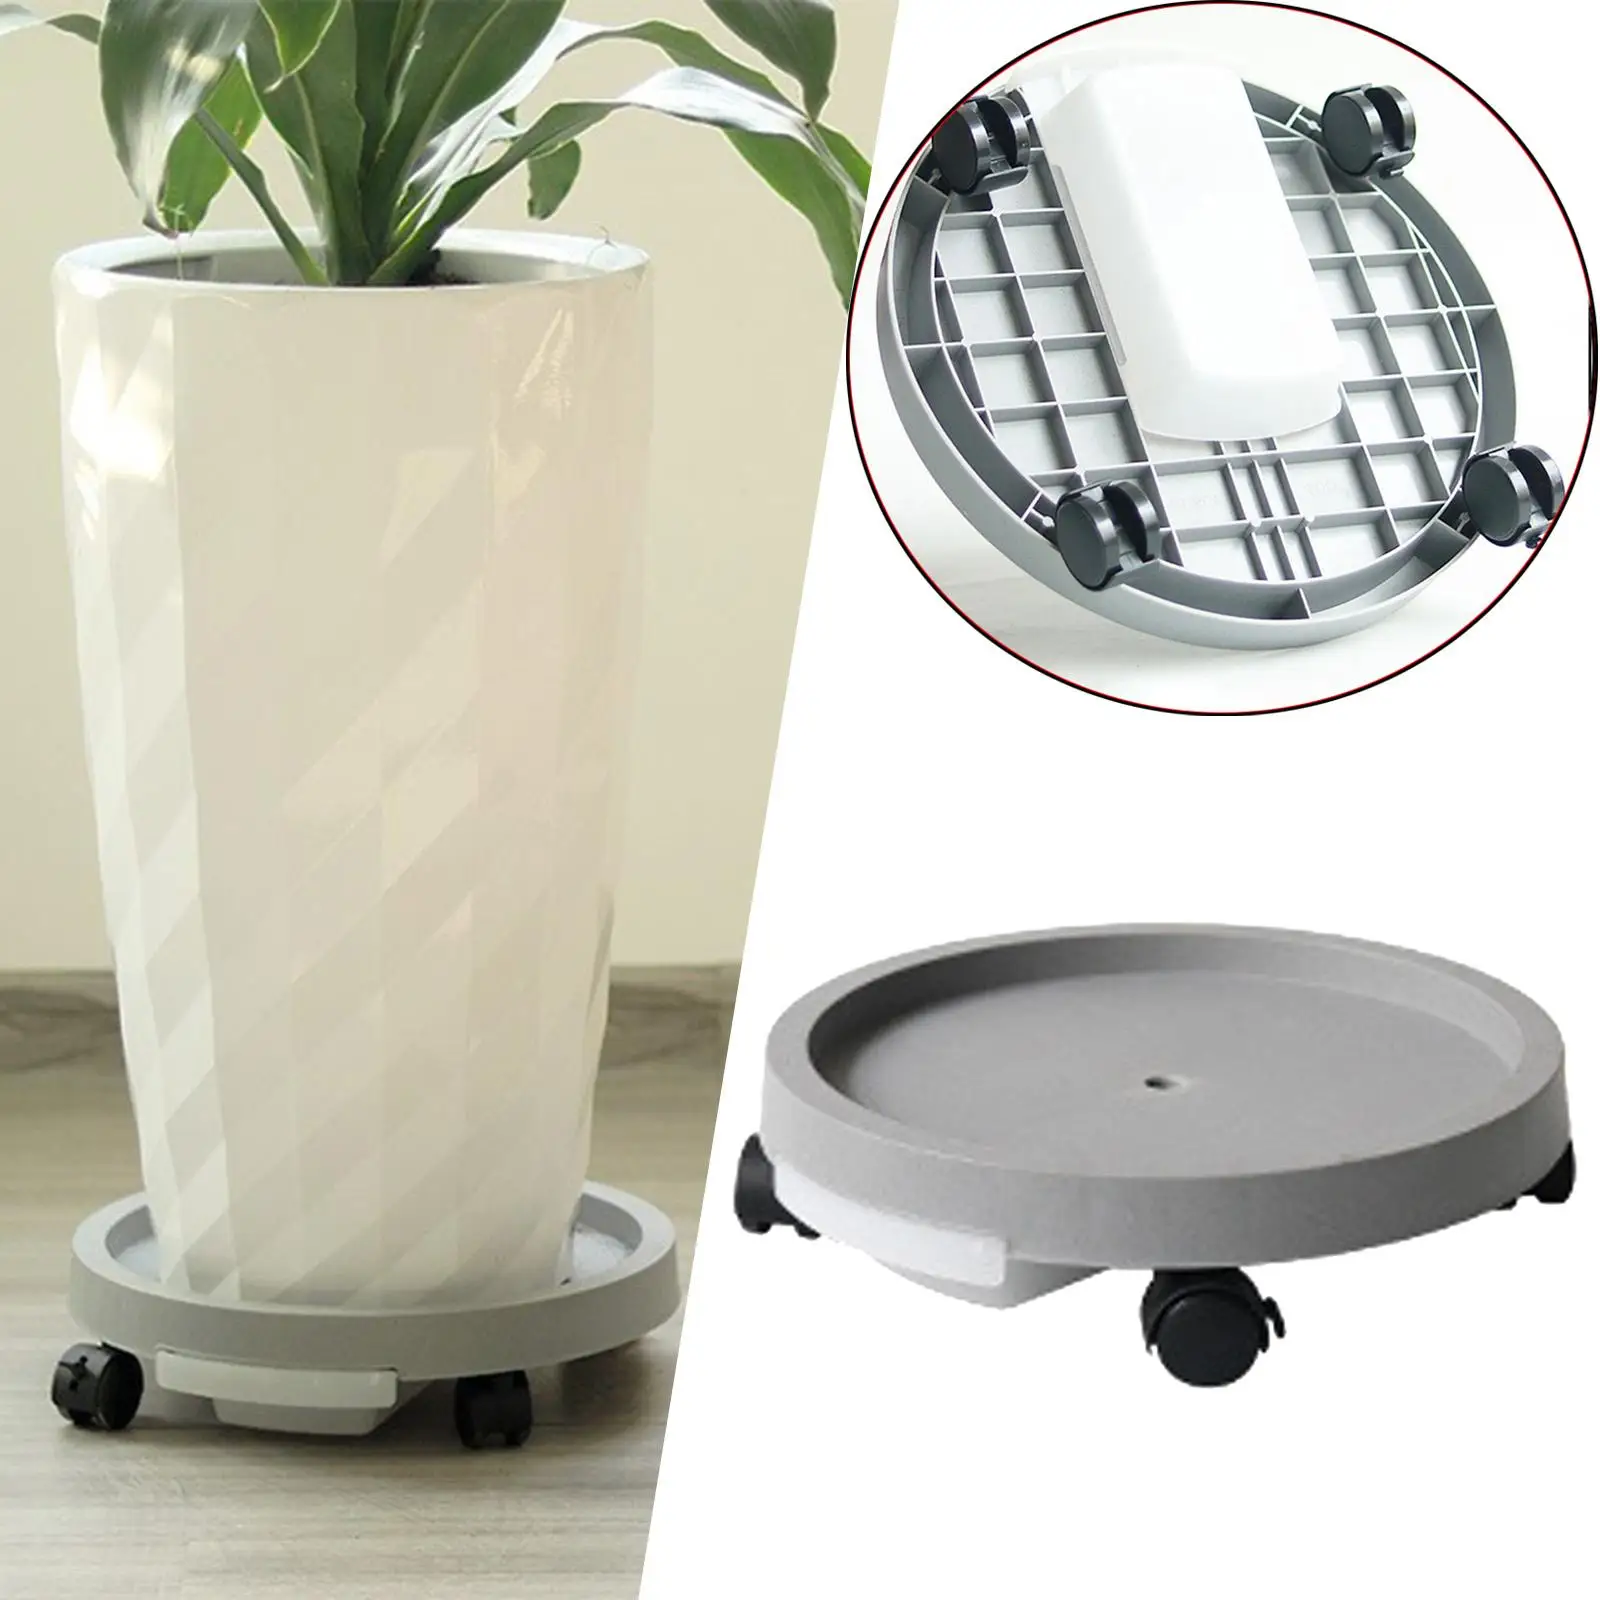 Heavy Flower Pots Tray with Casters Storage Planter Tray Caddy Mover Flower